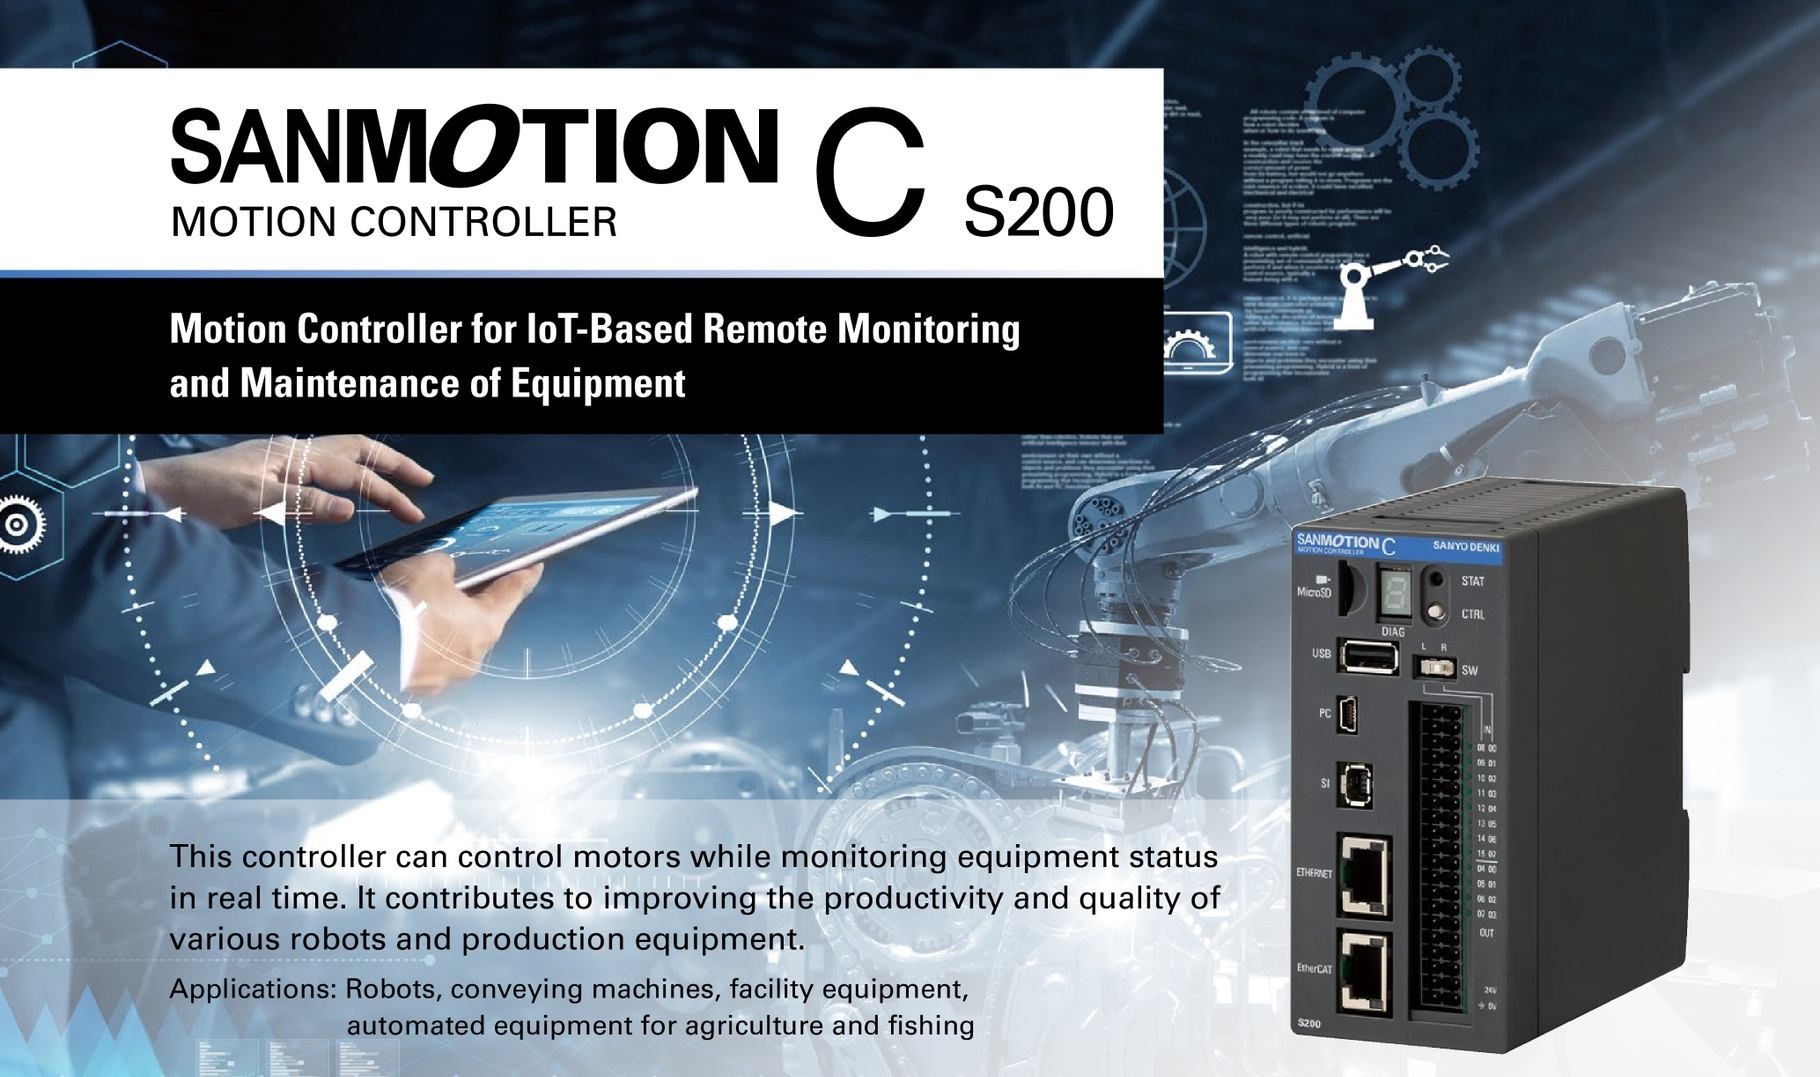 image of SANMOTION C S200 IoT motion controller